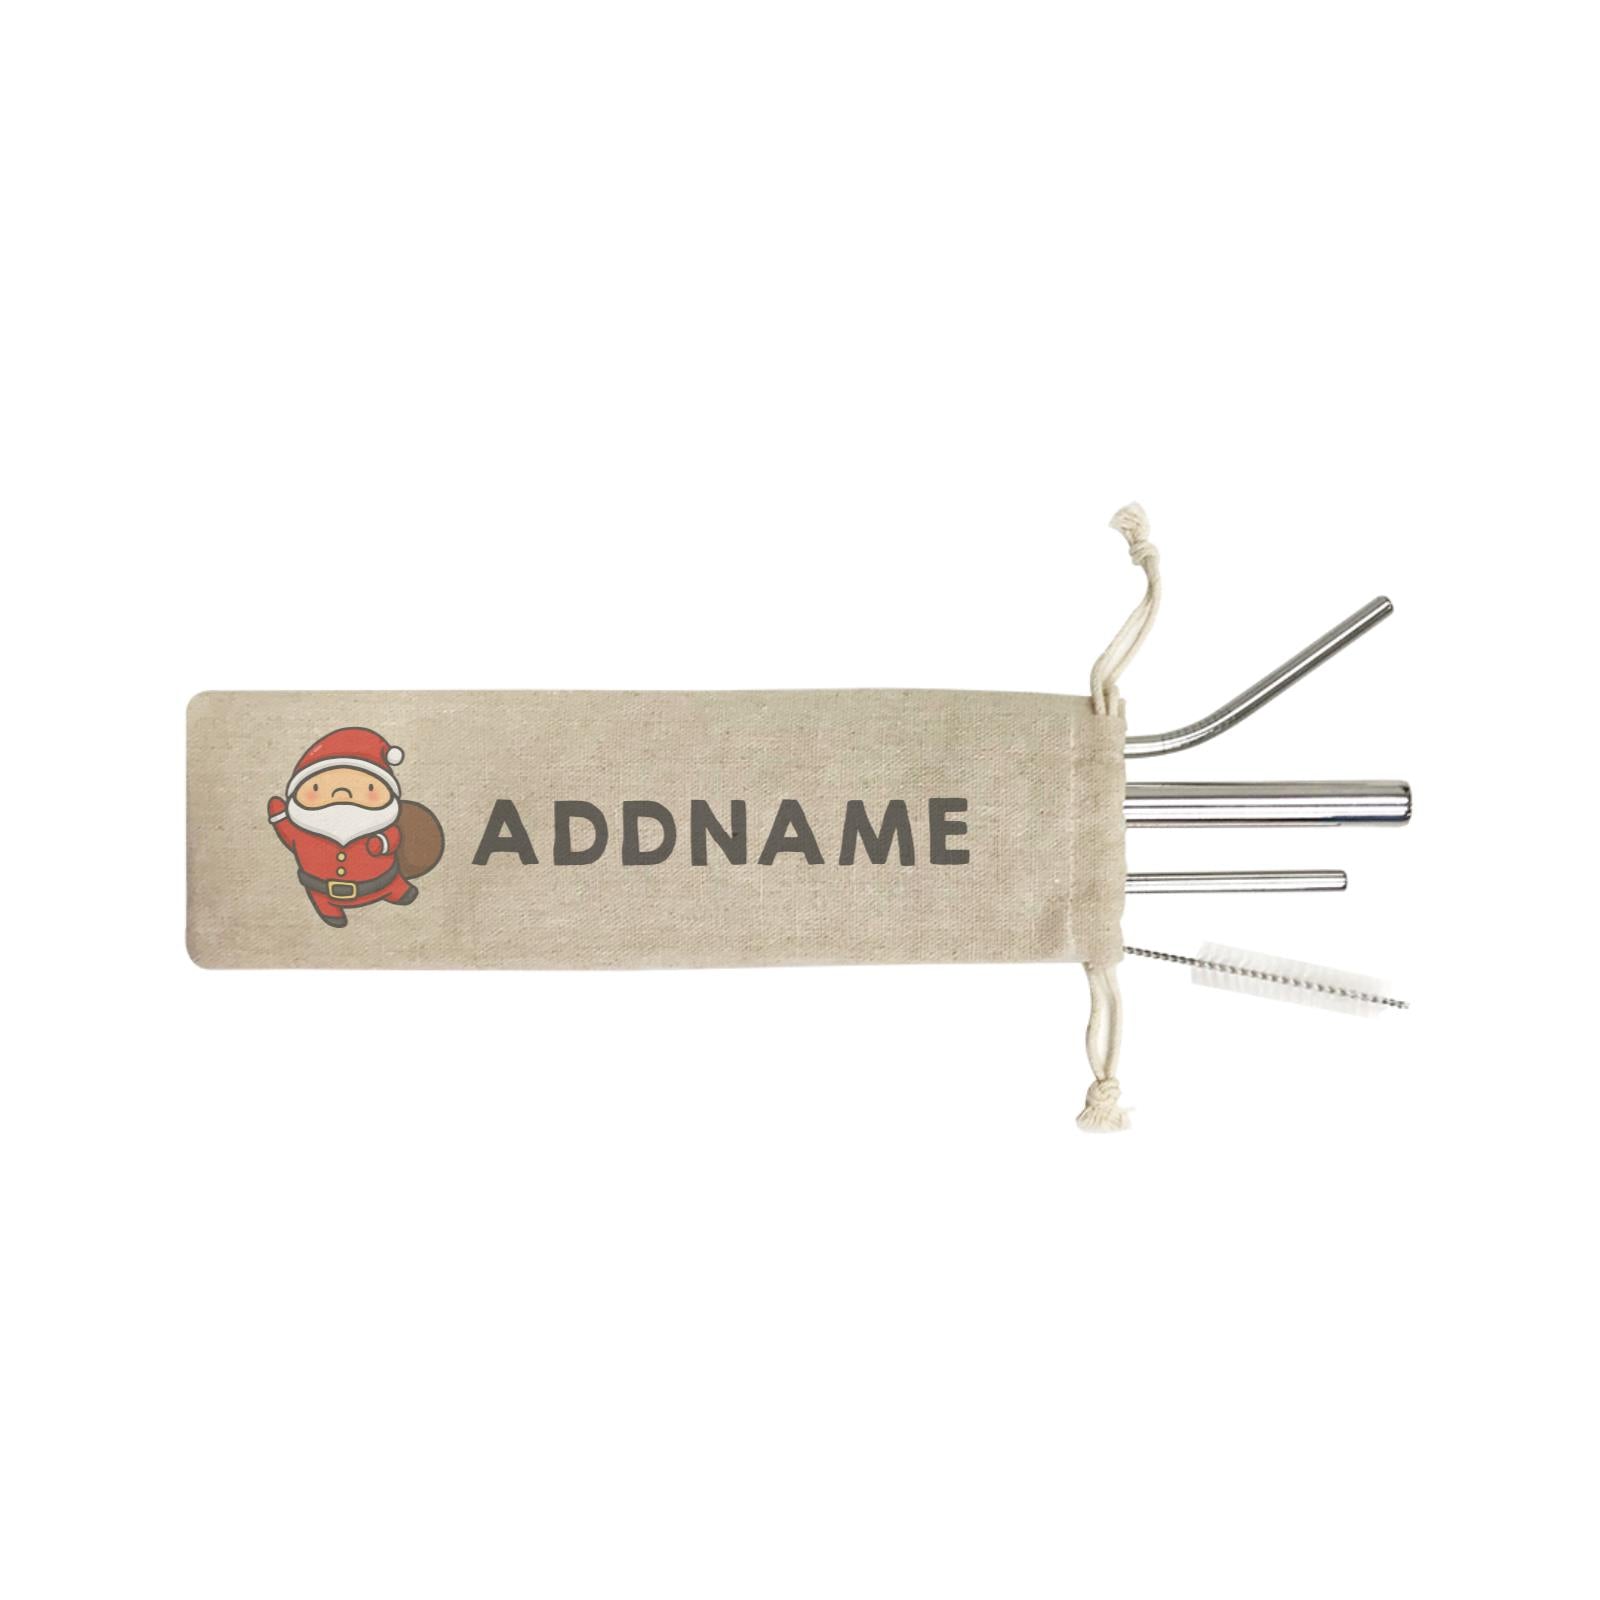 Xmas Cute Santa Claus Addname SB 4-in-1 Stainless Steel Straw Set In a Satchel